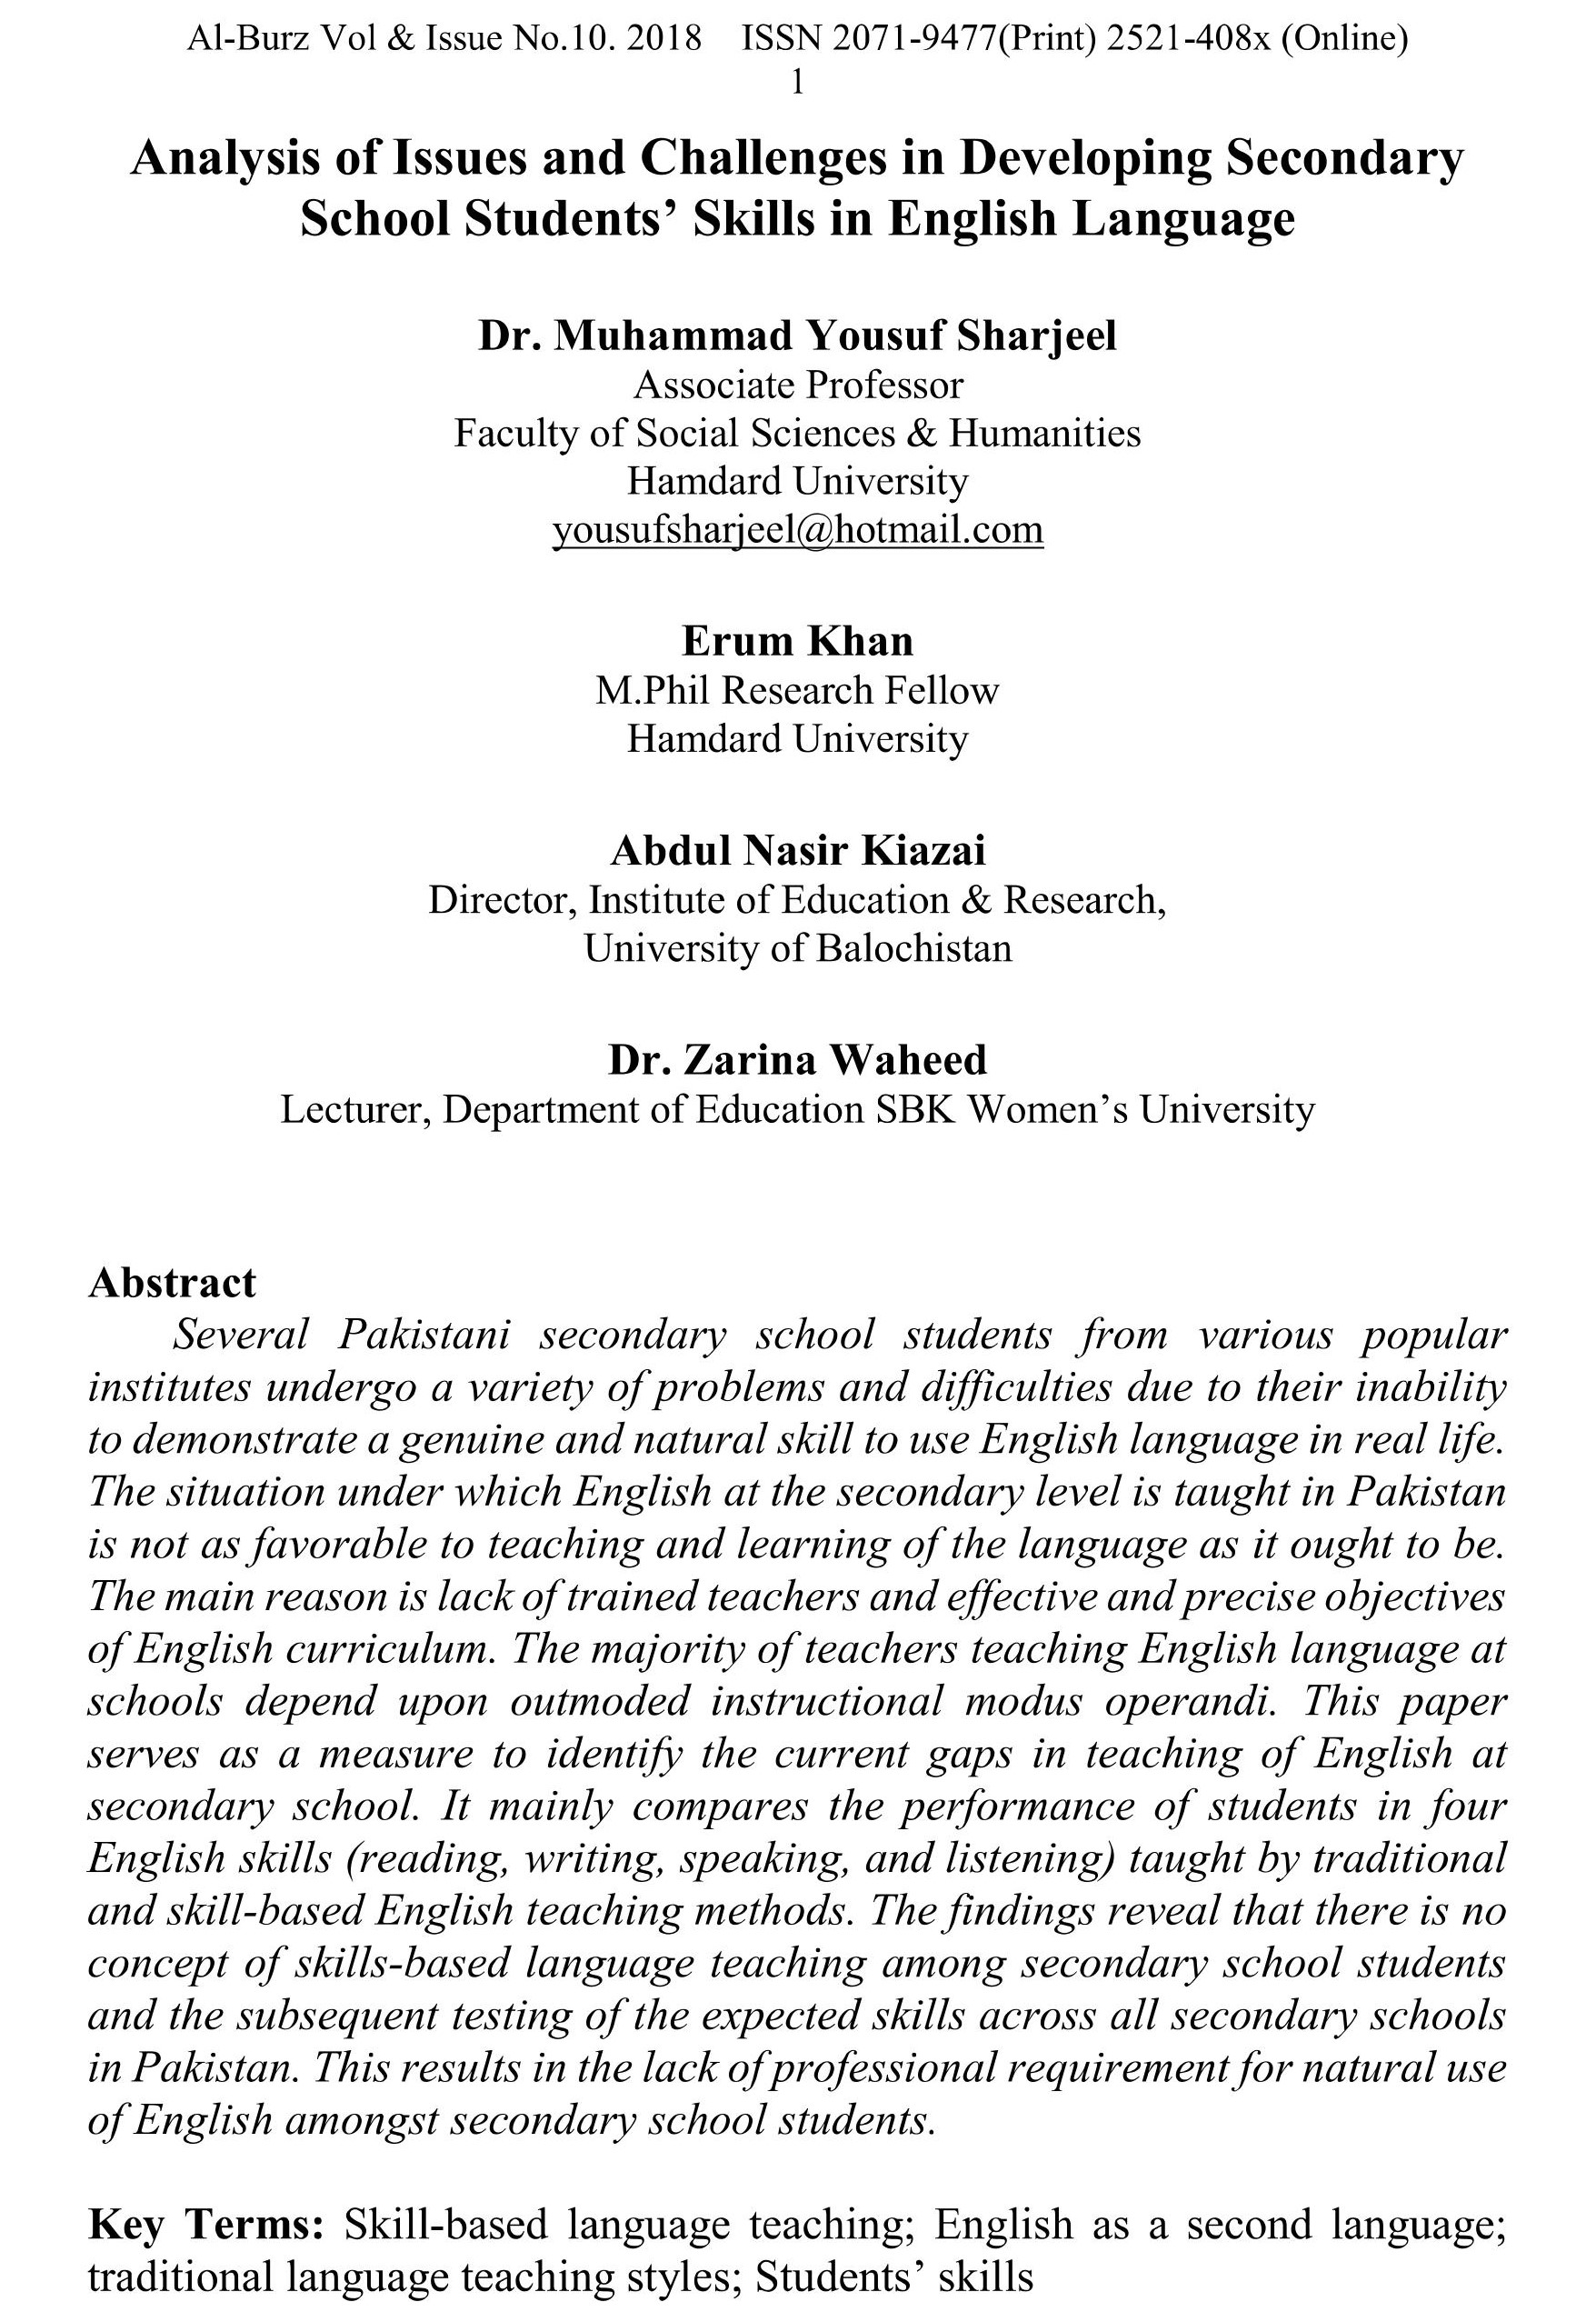 Analysis of Issues and Challenges in Developing Secondary School Students’ Skills in English Language